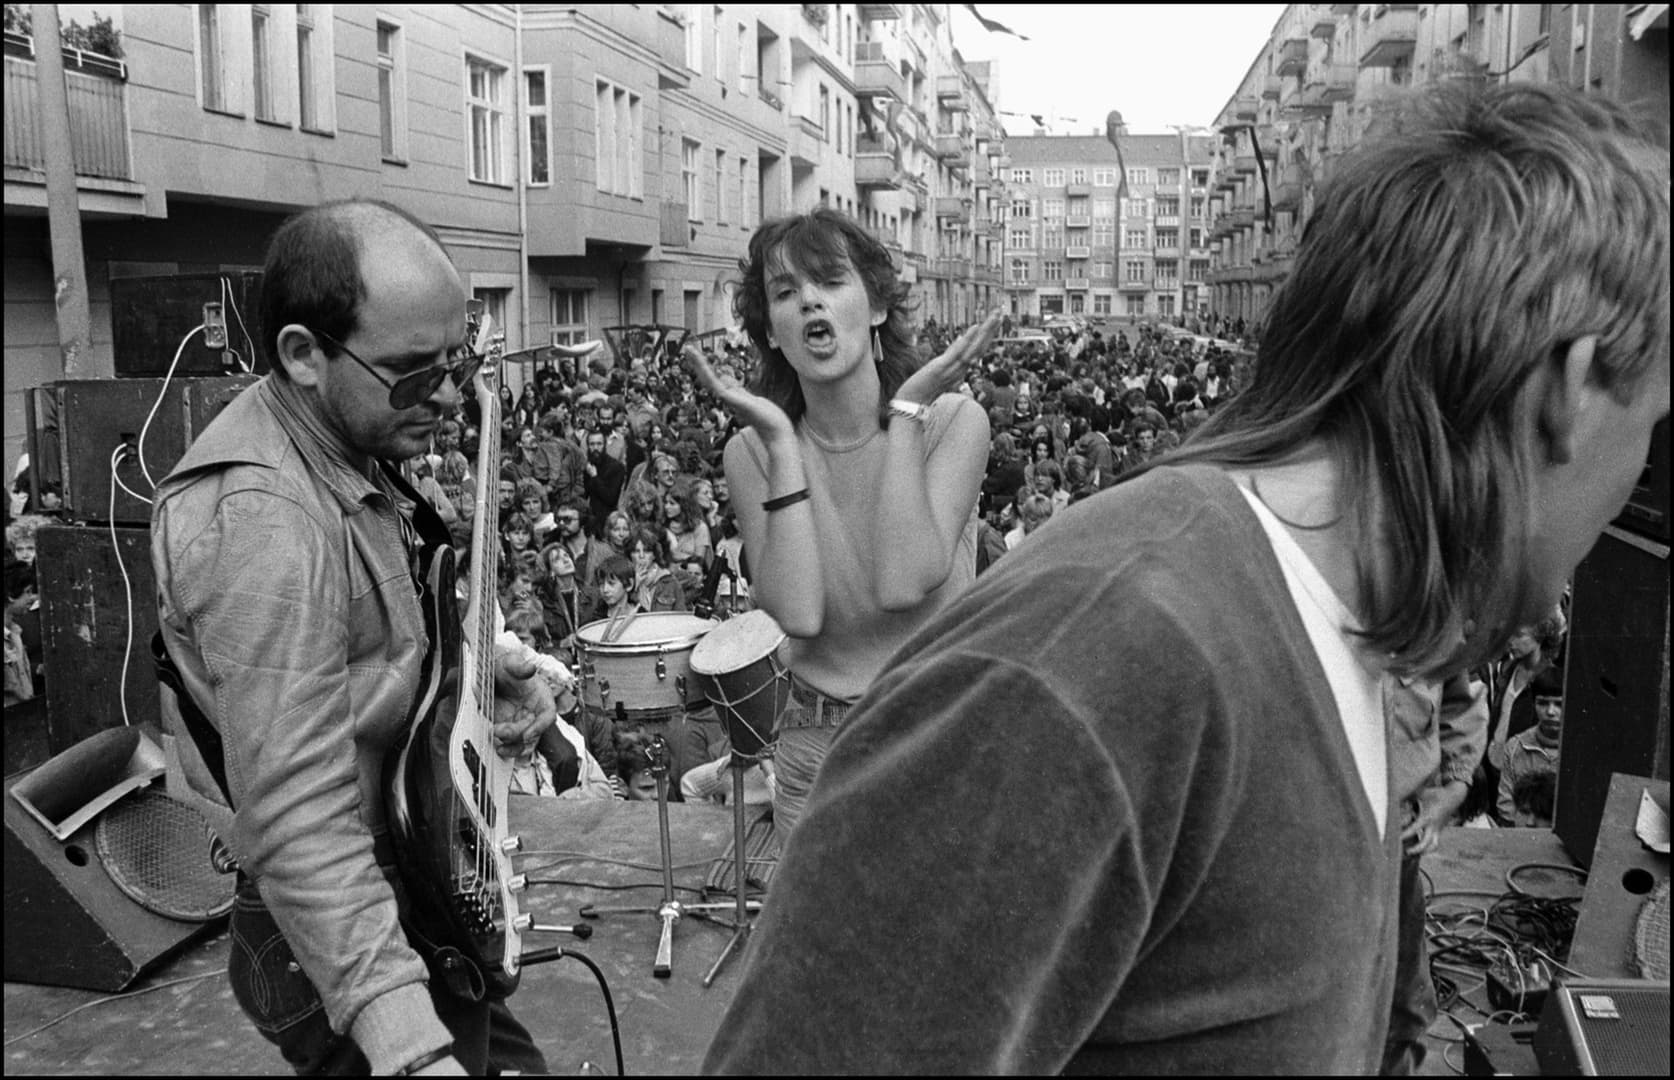 The band “itching”, street party in front of the youth club “impulse”, Berlin, 1981